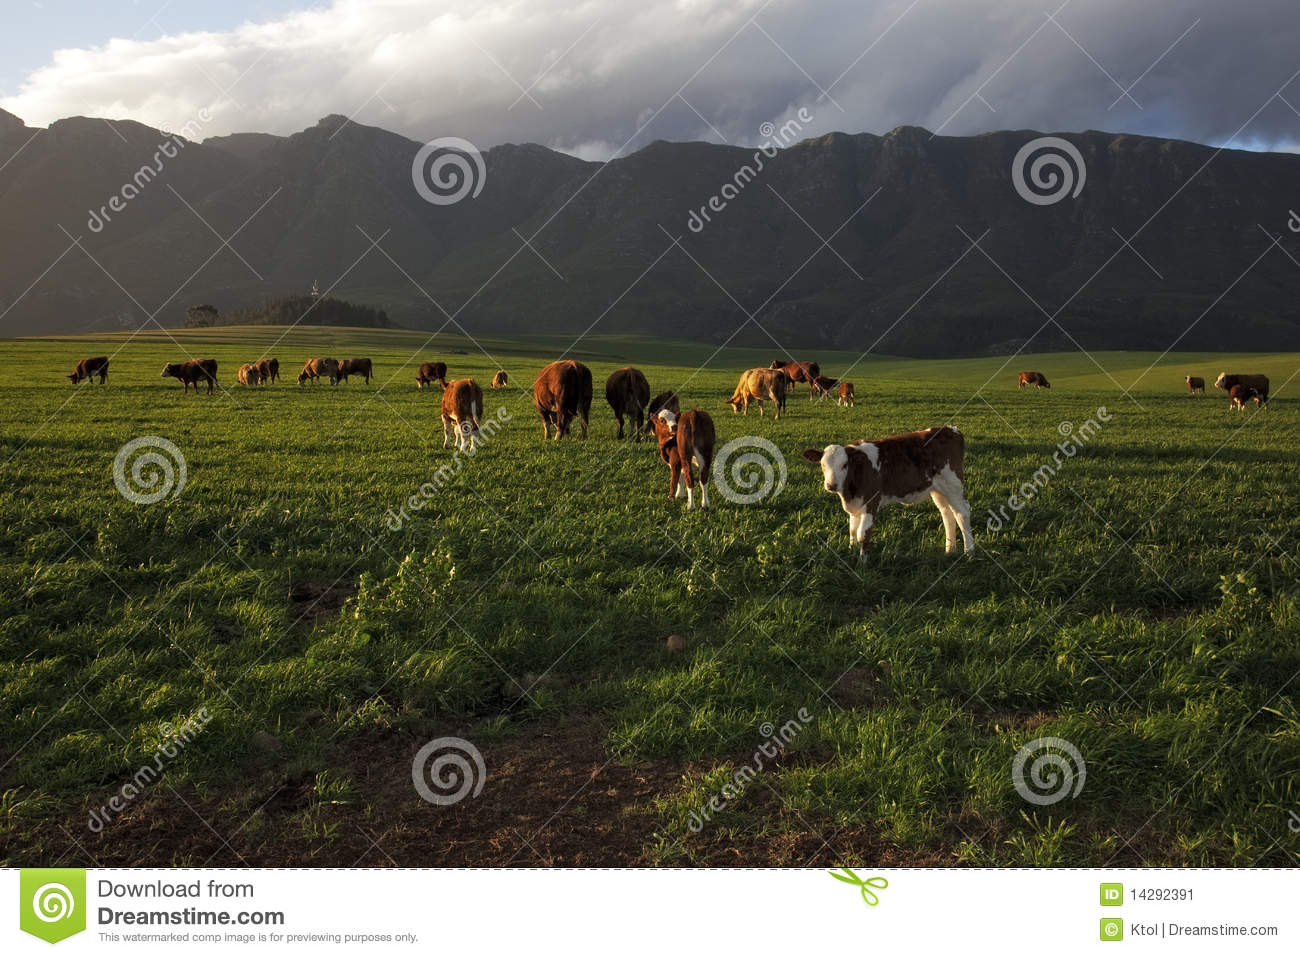 Image Of A Dairy Farm With A Mountain In The Background In The Western